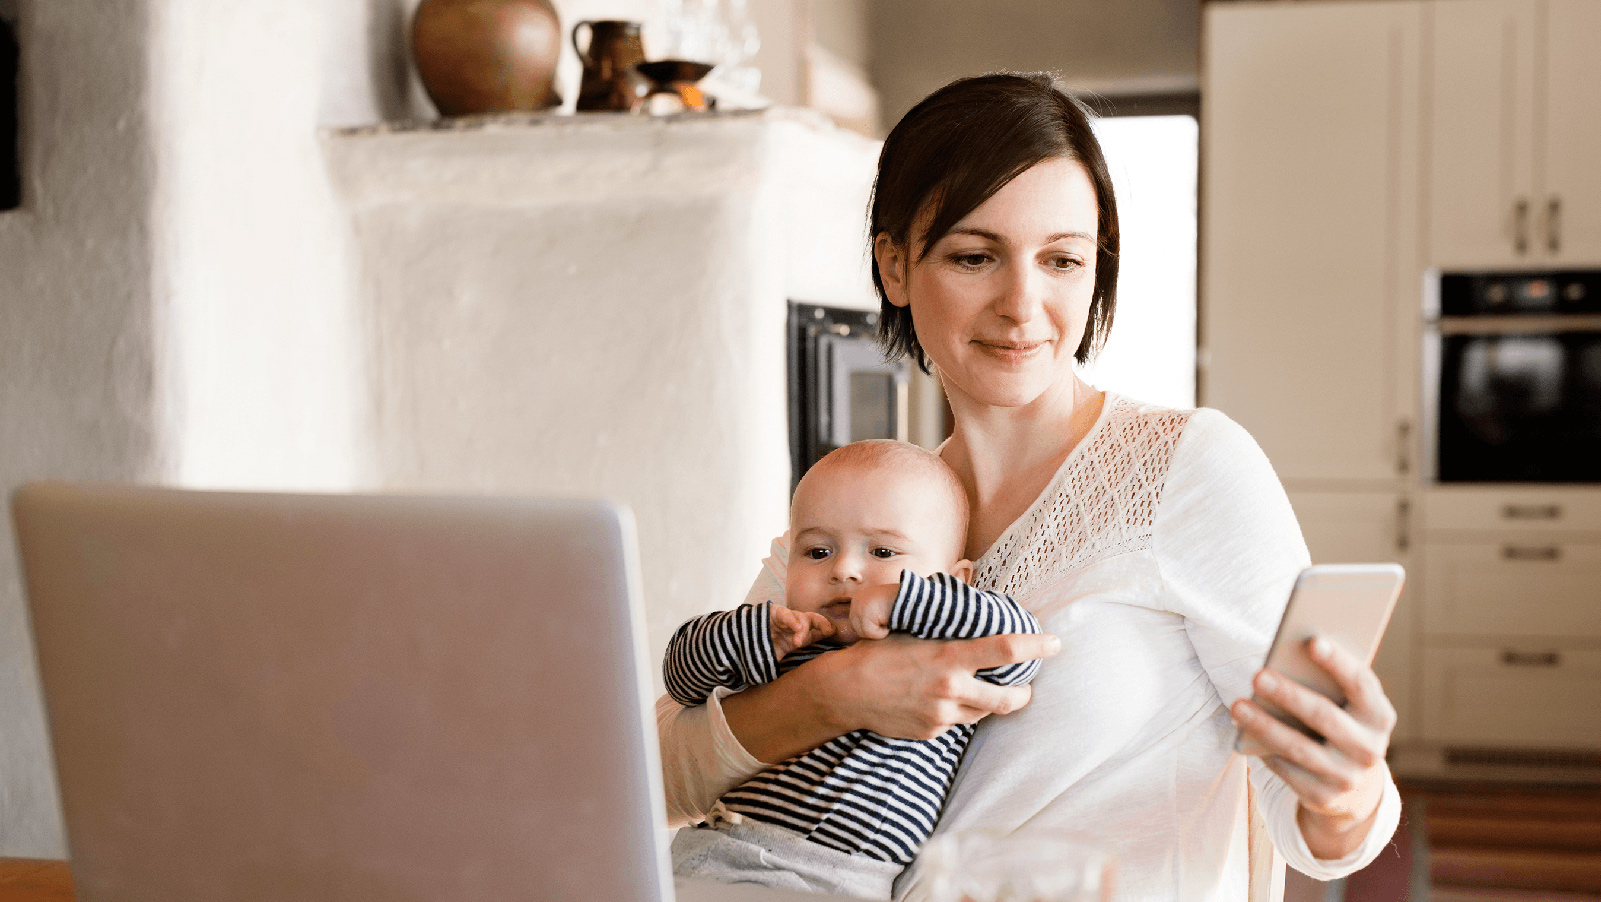 Woman smiling and holding a baby while looking at her phone in the kitchen.